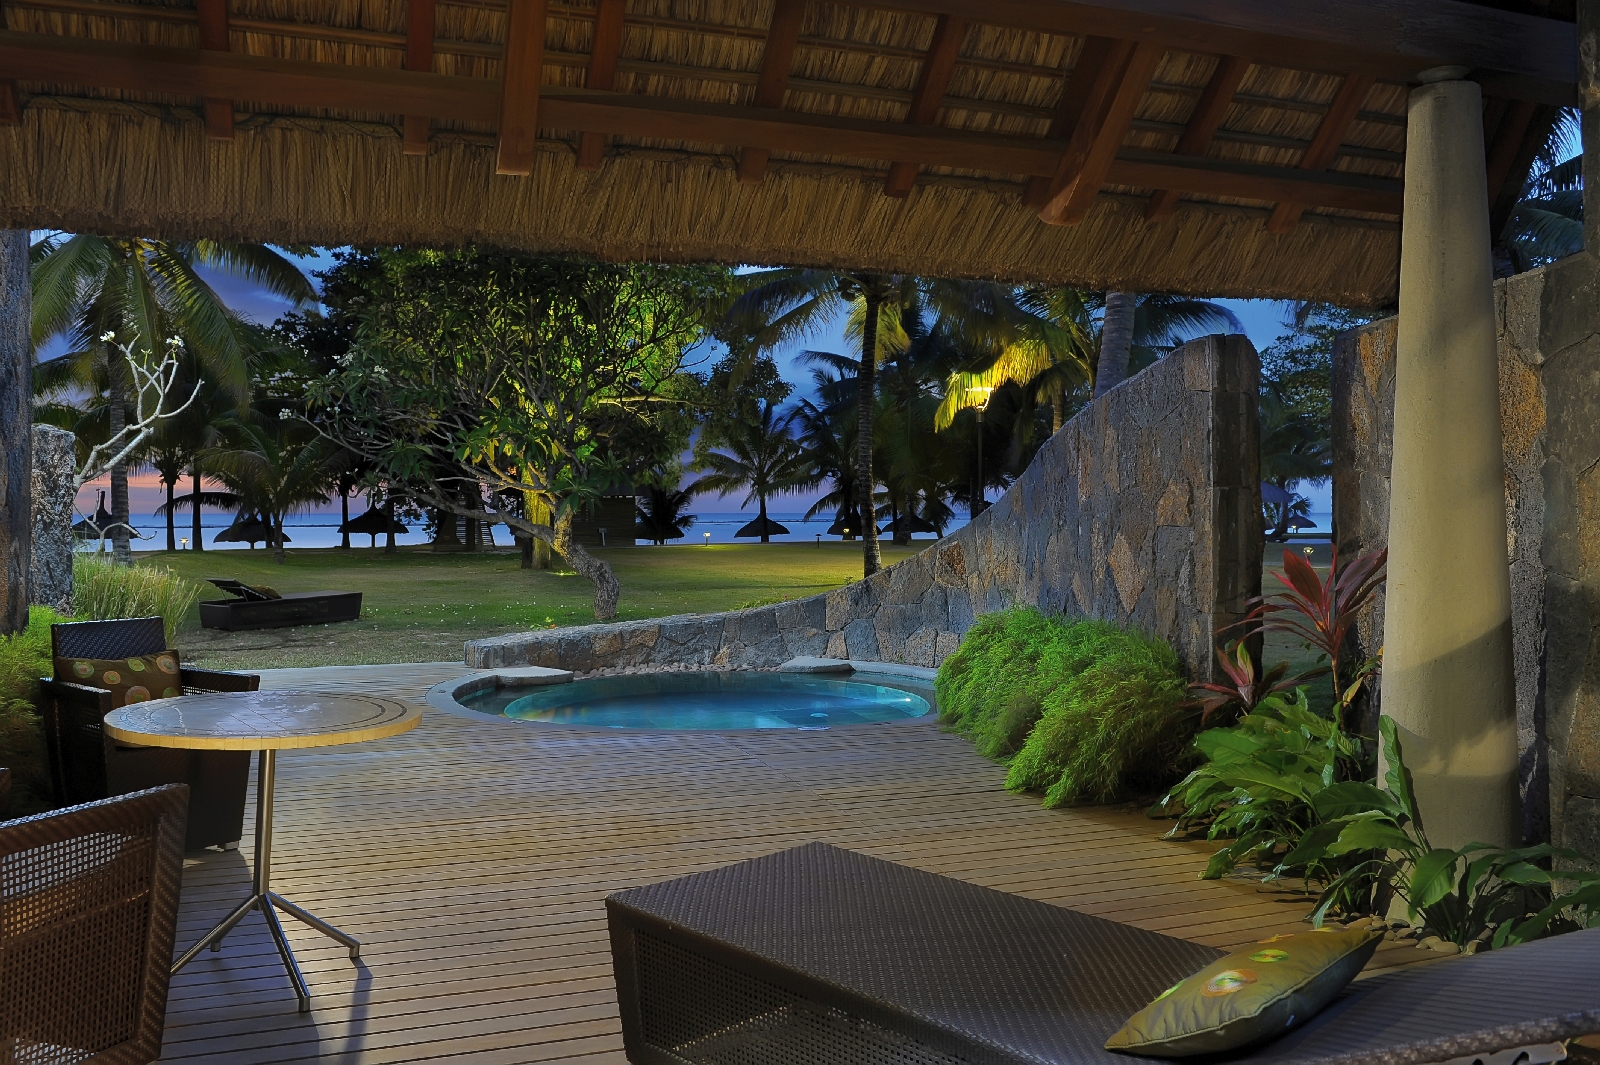 The swimming pool of a beachfront suite at Royal Palm, Mauritius